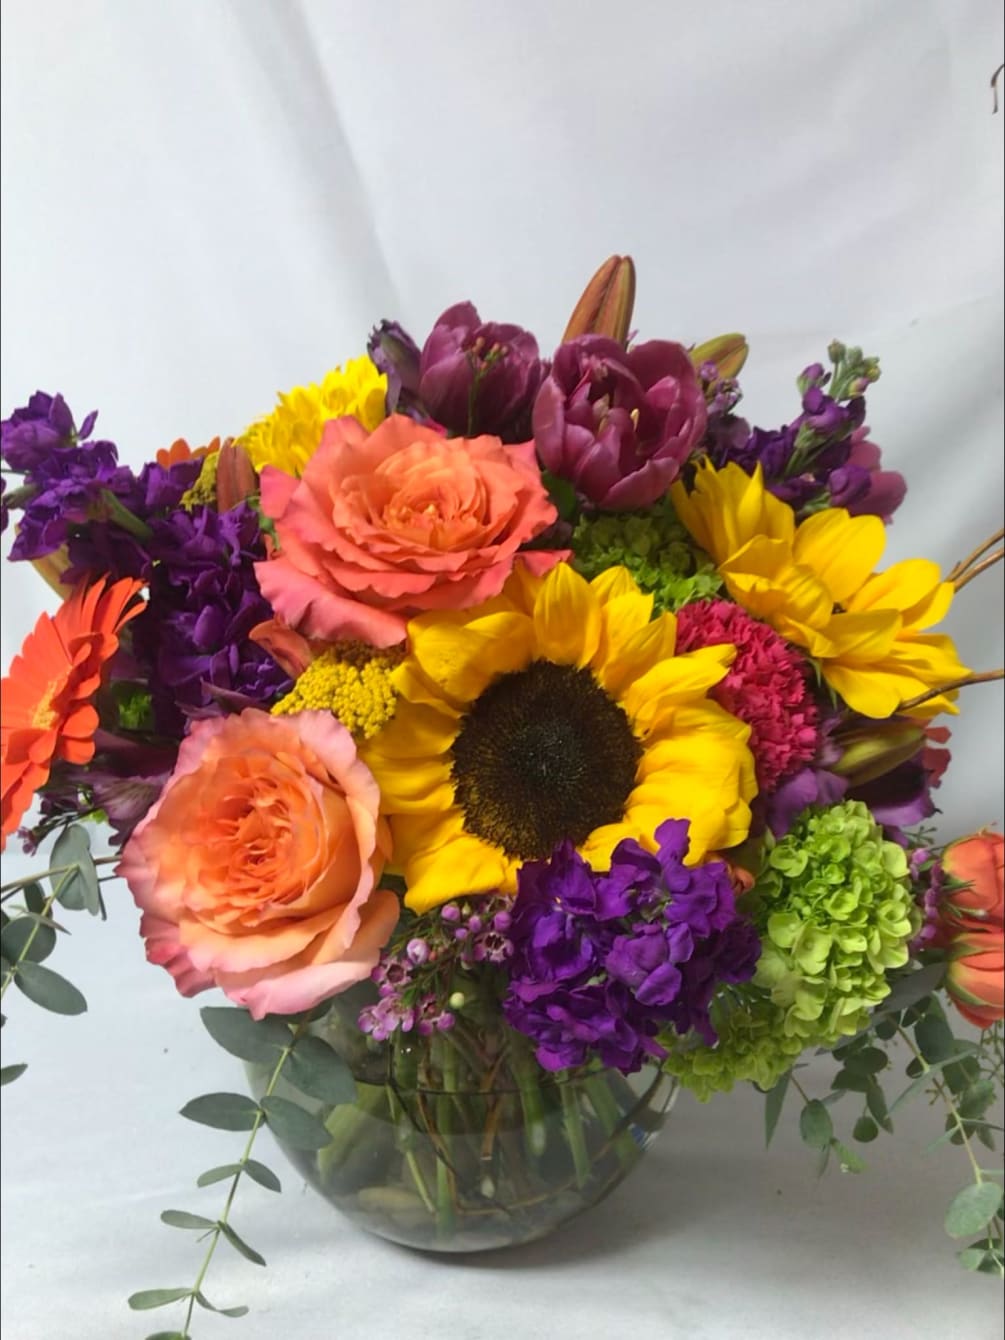 Yellow sunflowers and daisies, purple tulips and stock, pink and rose-colored blooms